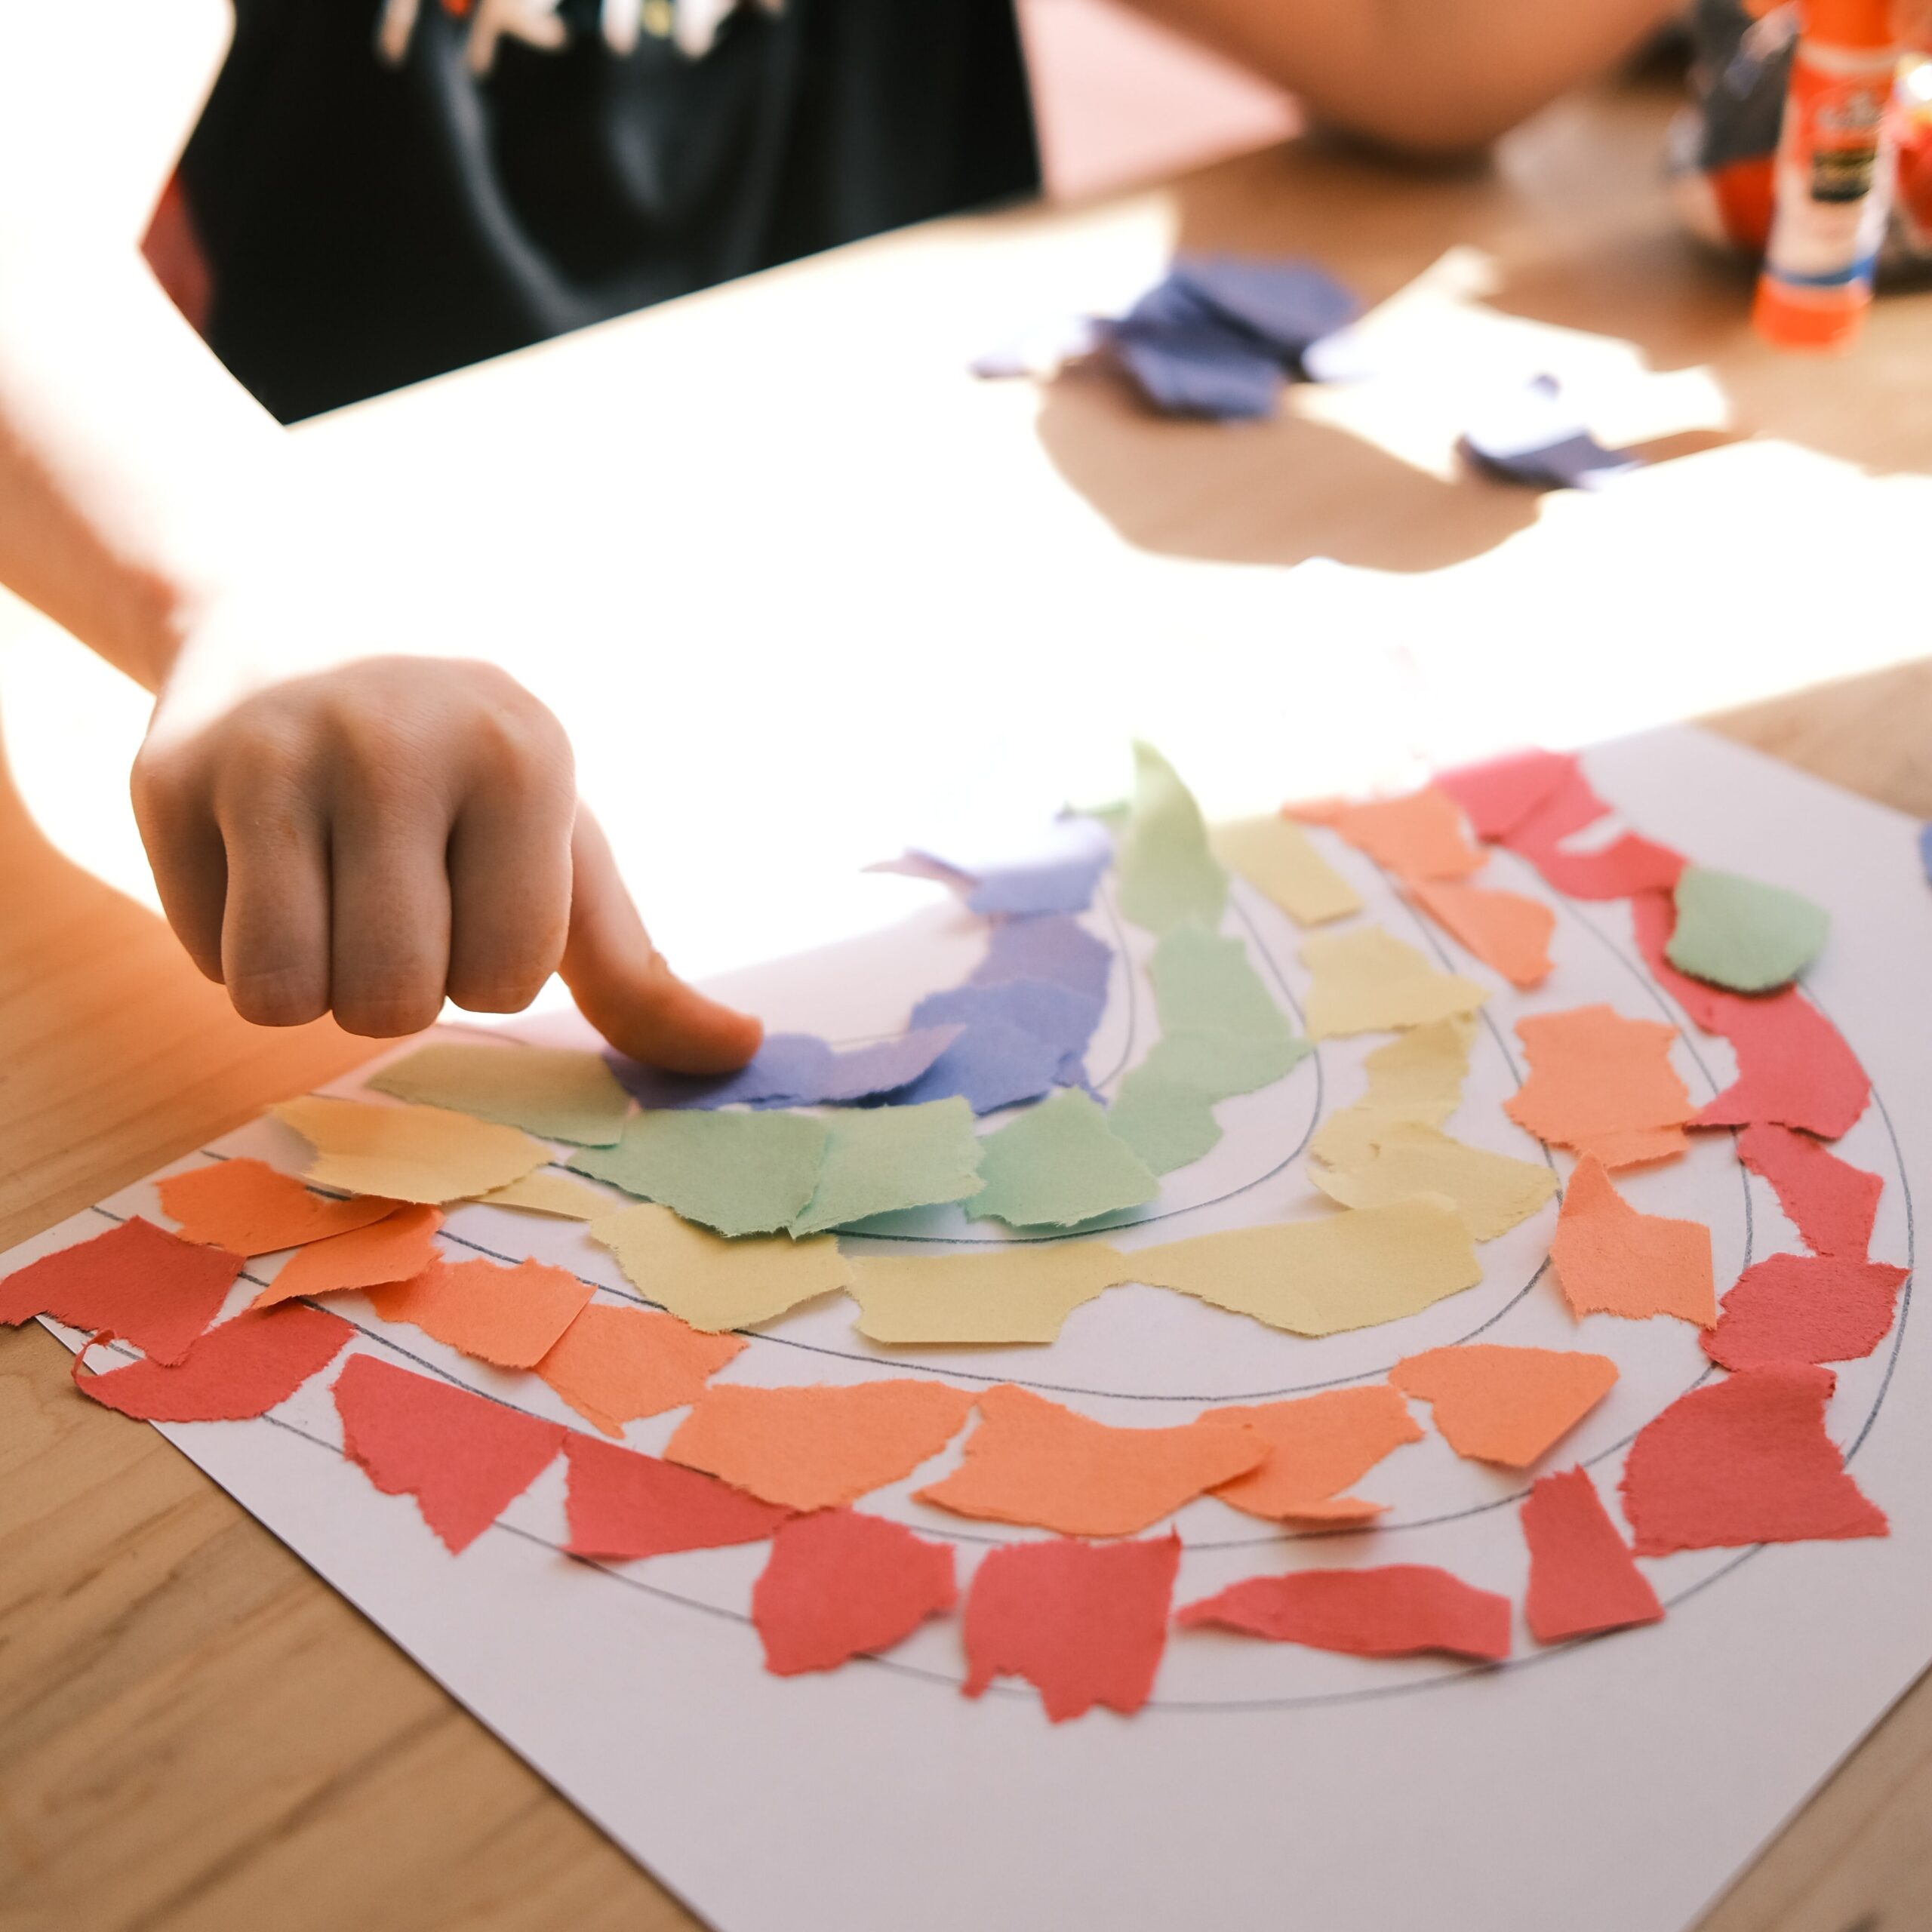 A child makes a rainbow craft out of torn, colored construction paper.